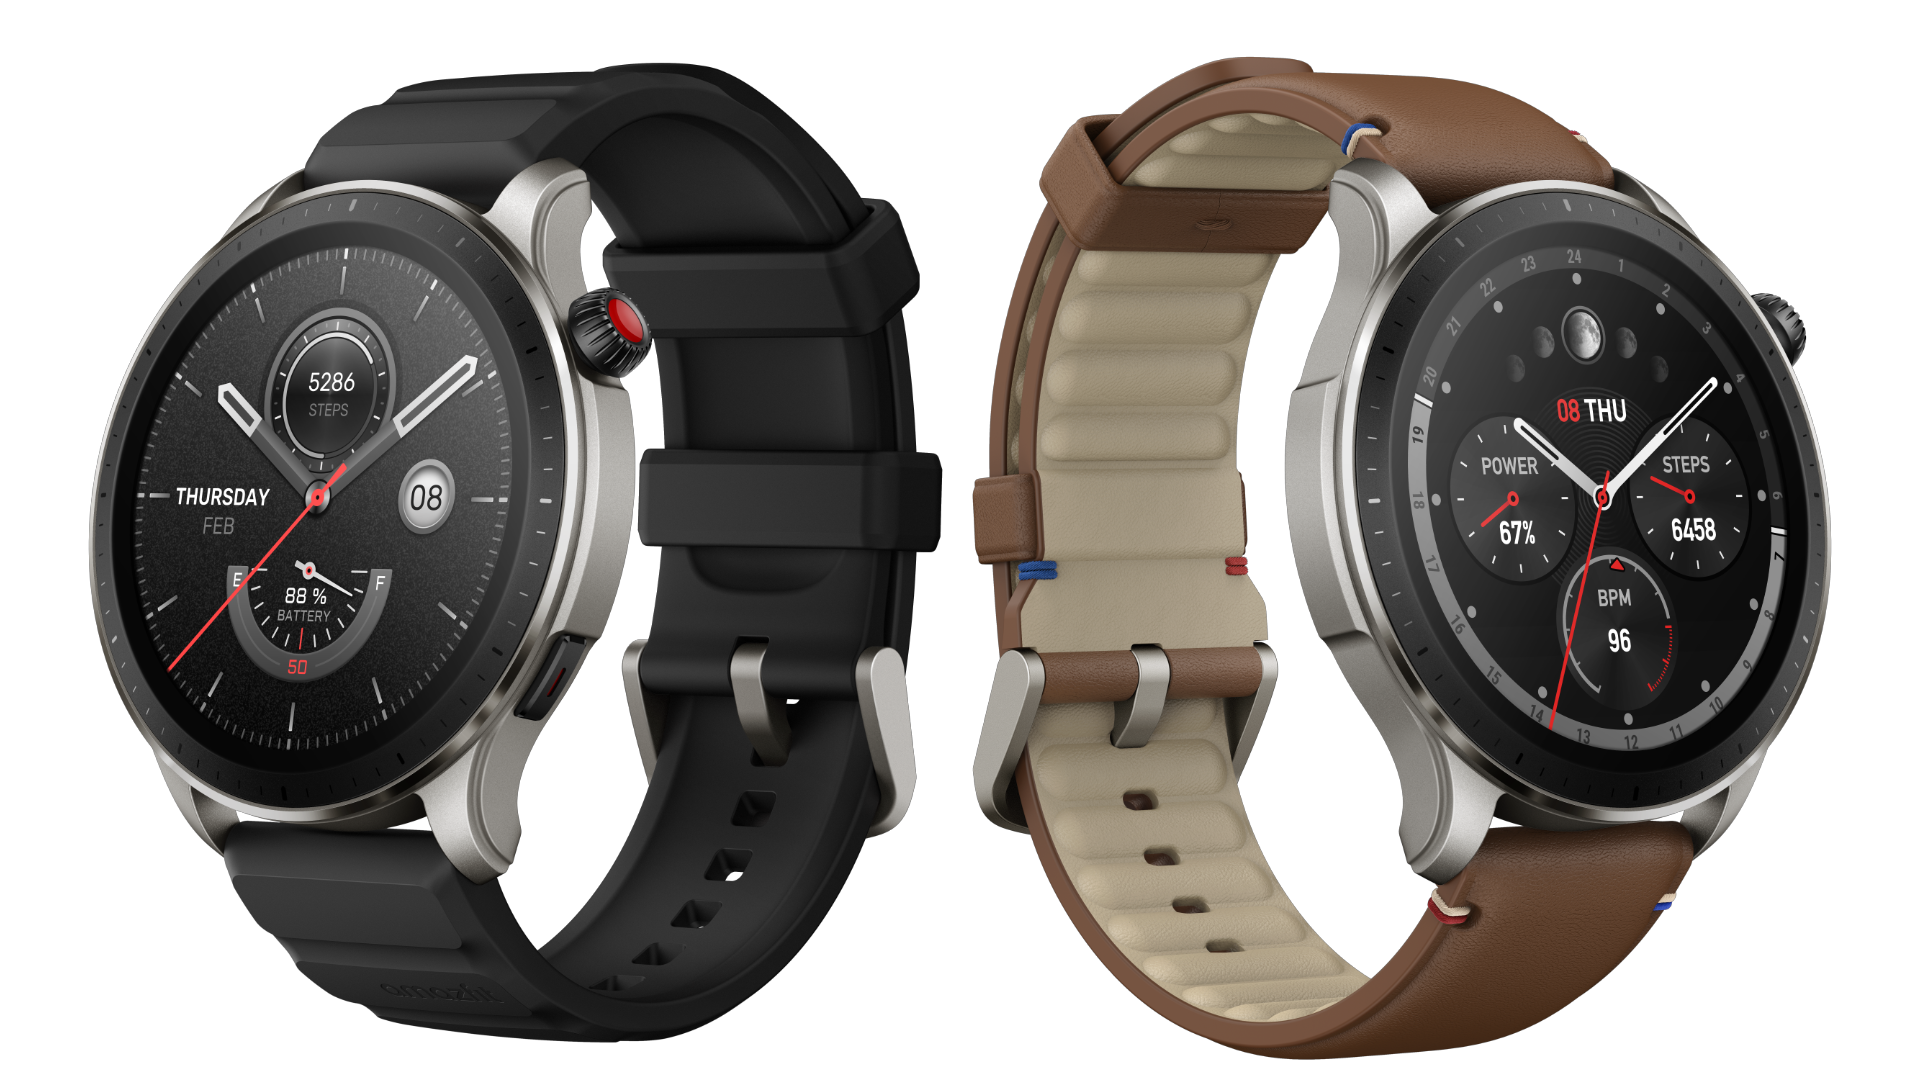 Amazfit GTR Mini smartwatch with GPS has just arrived -   News